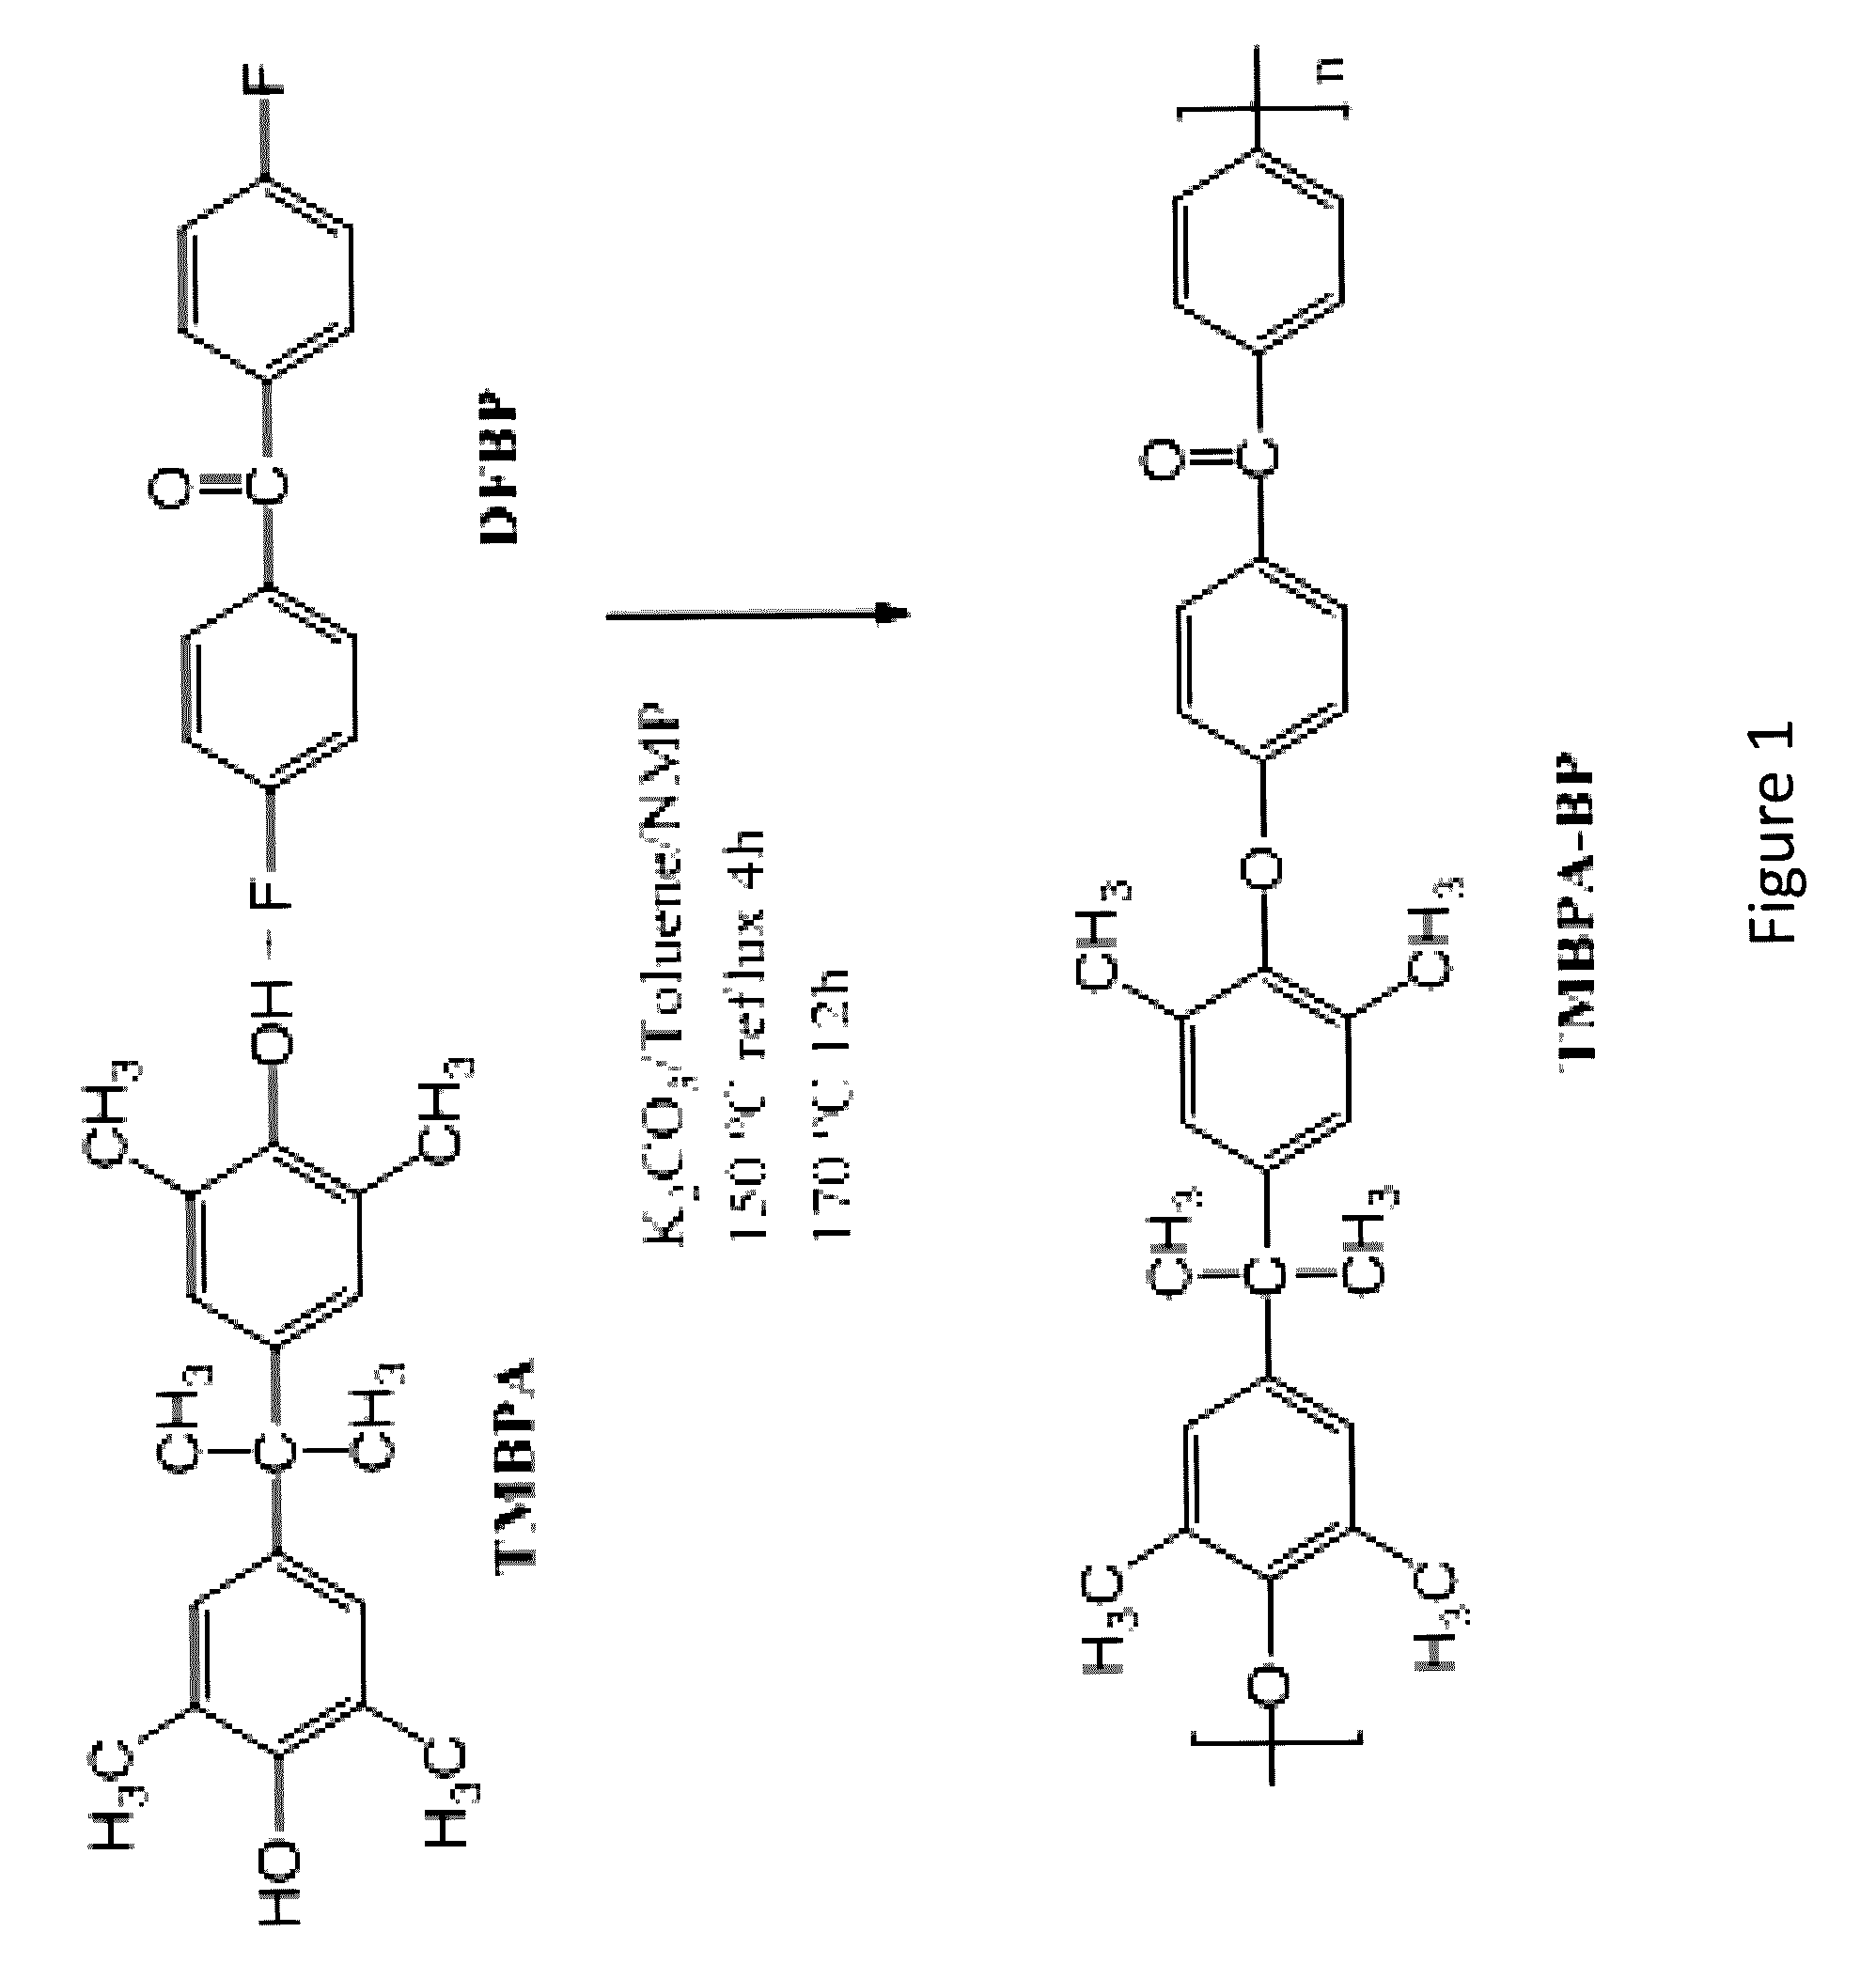 Crosslinked polymer compositions, gas separation membranes of such crosslinked polymer compositions, methods of making such membranes, and methods of separating gases using such membranes